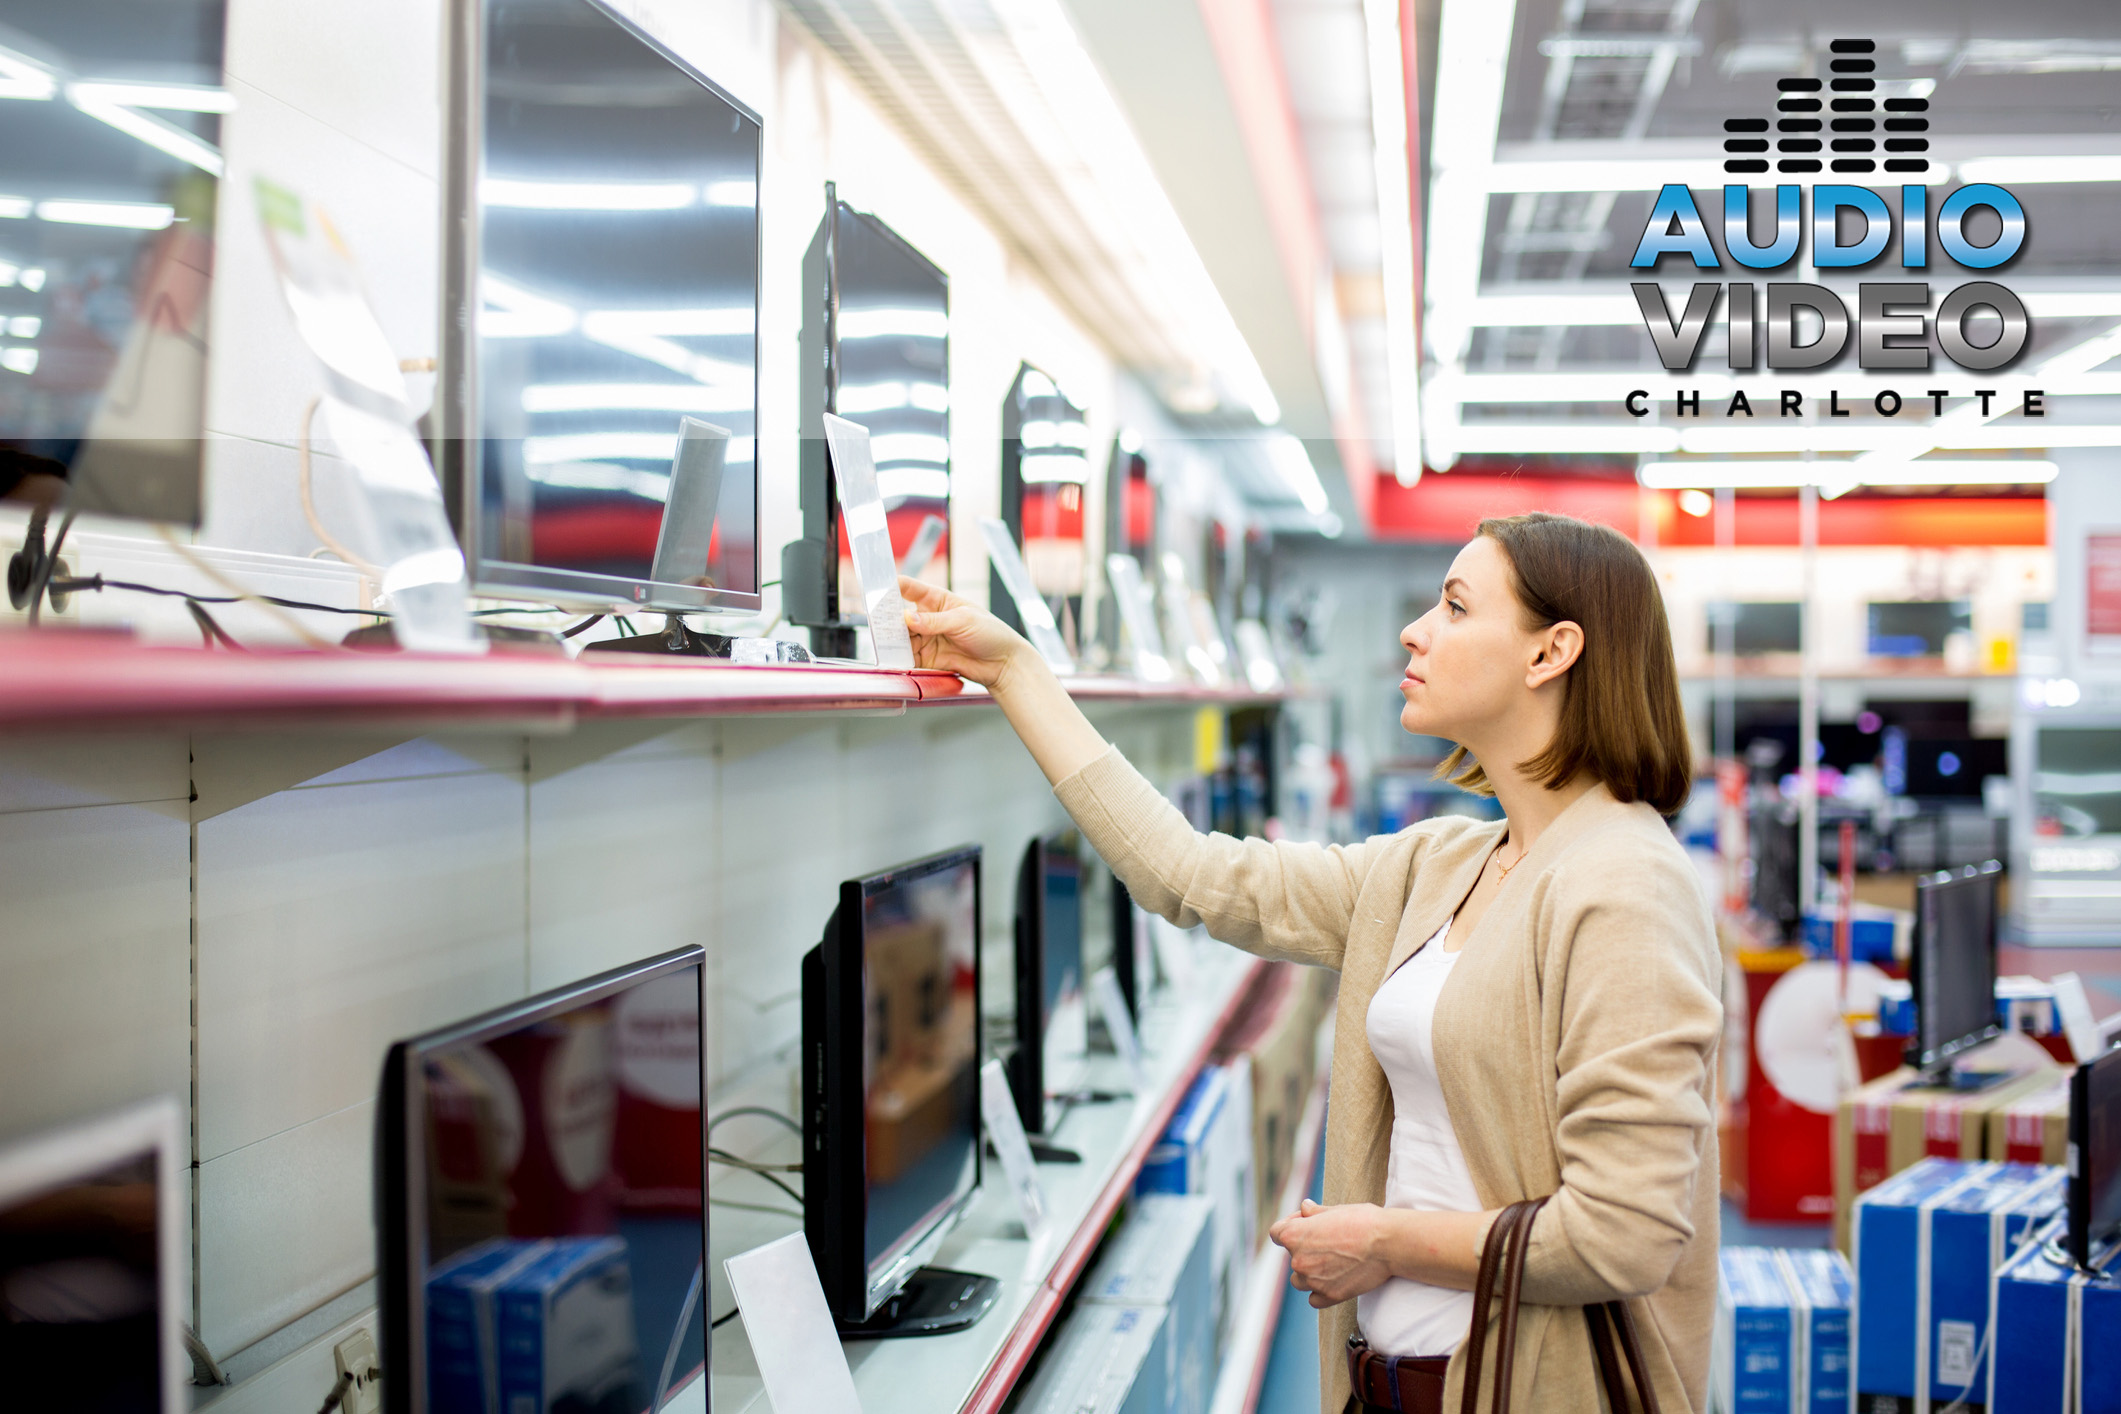 Buy From Audio Video before shopping at Big Box Store